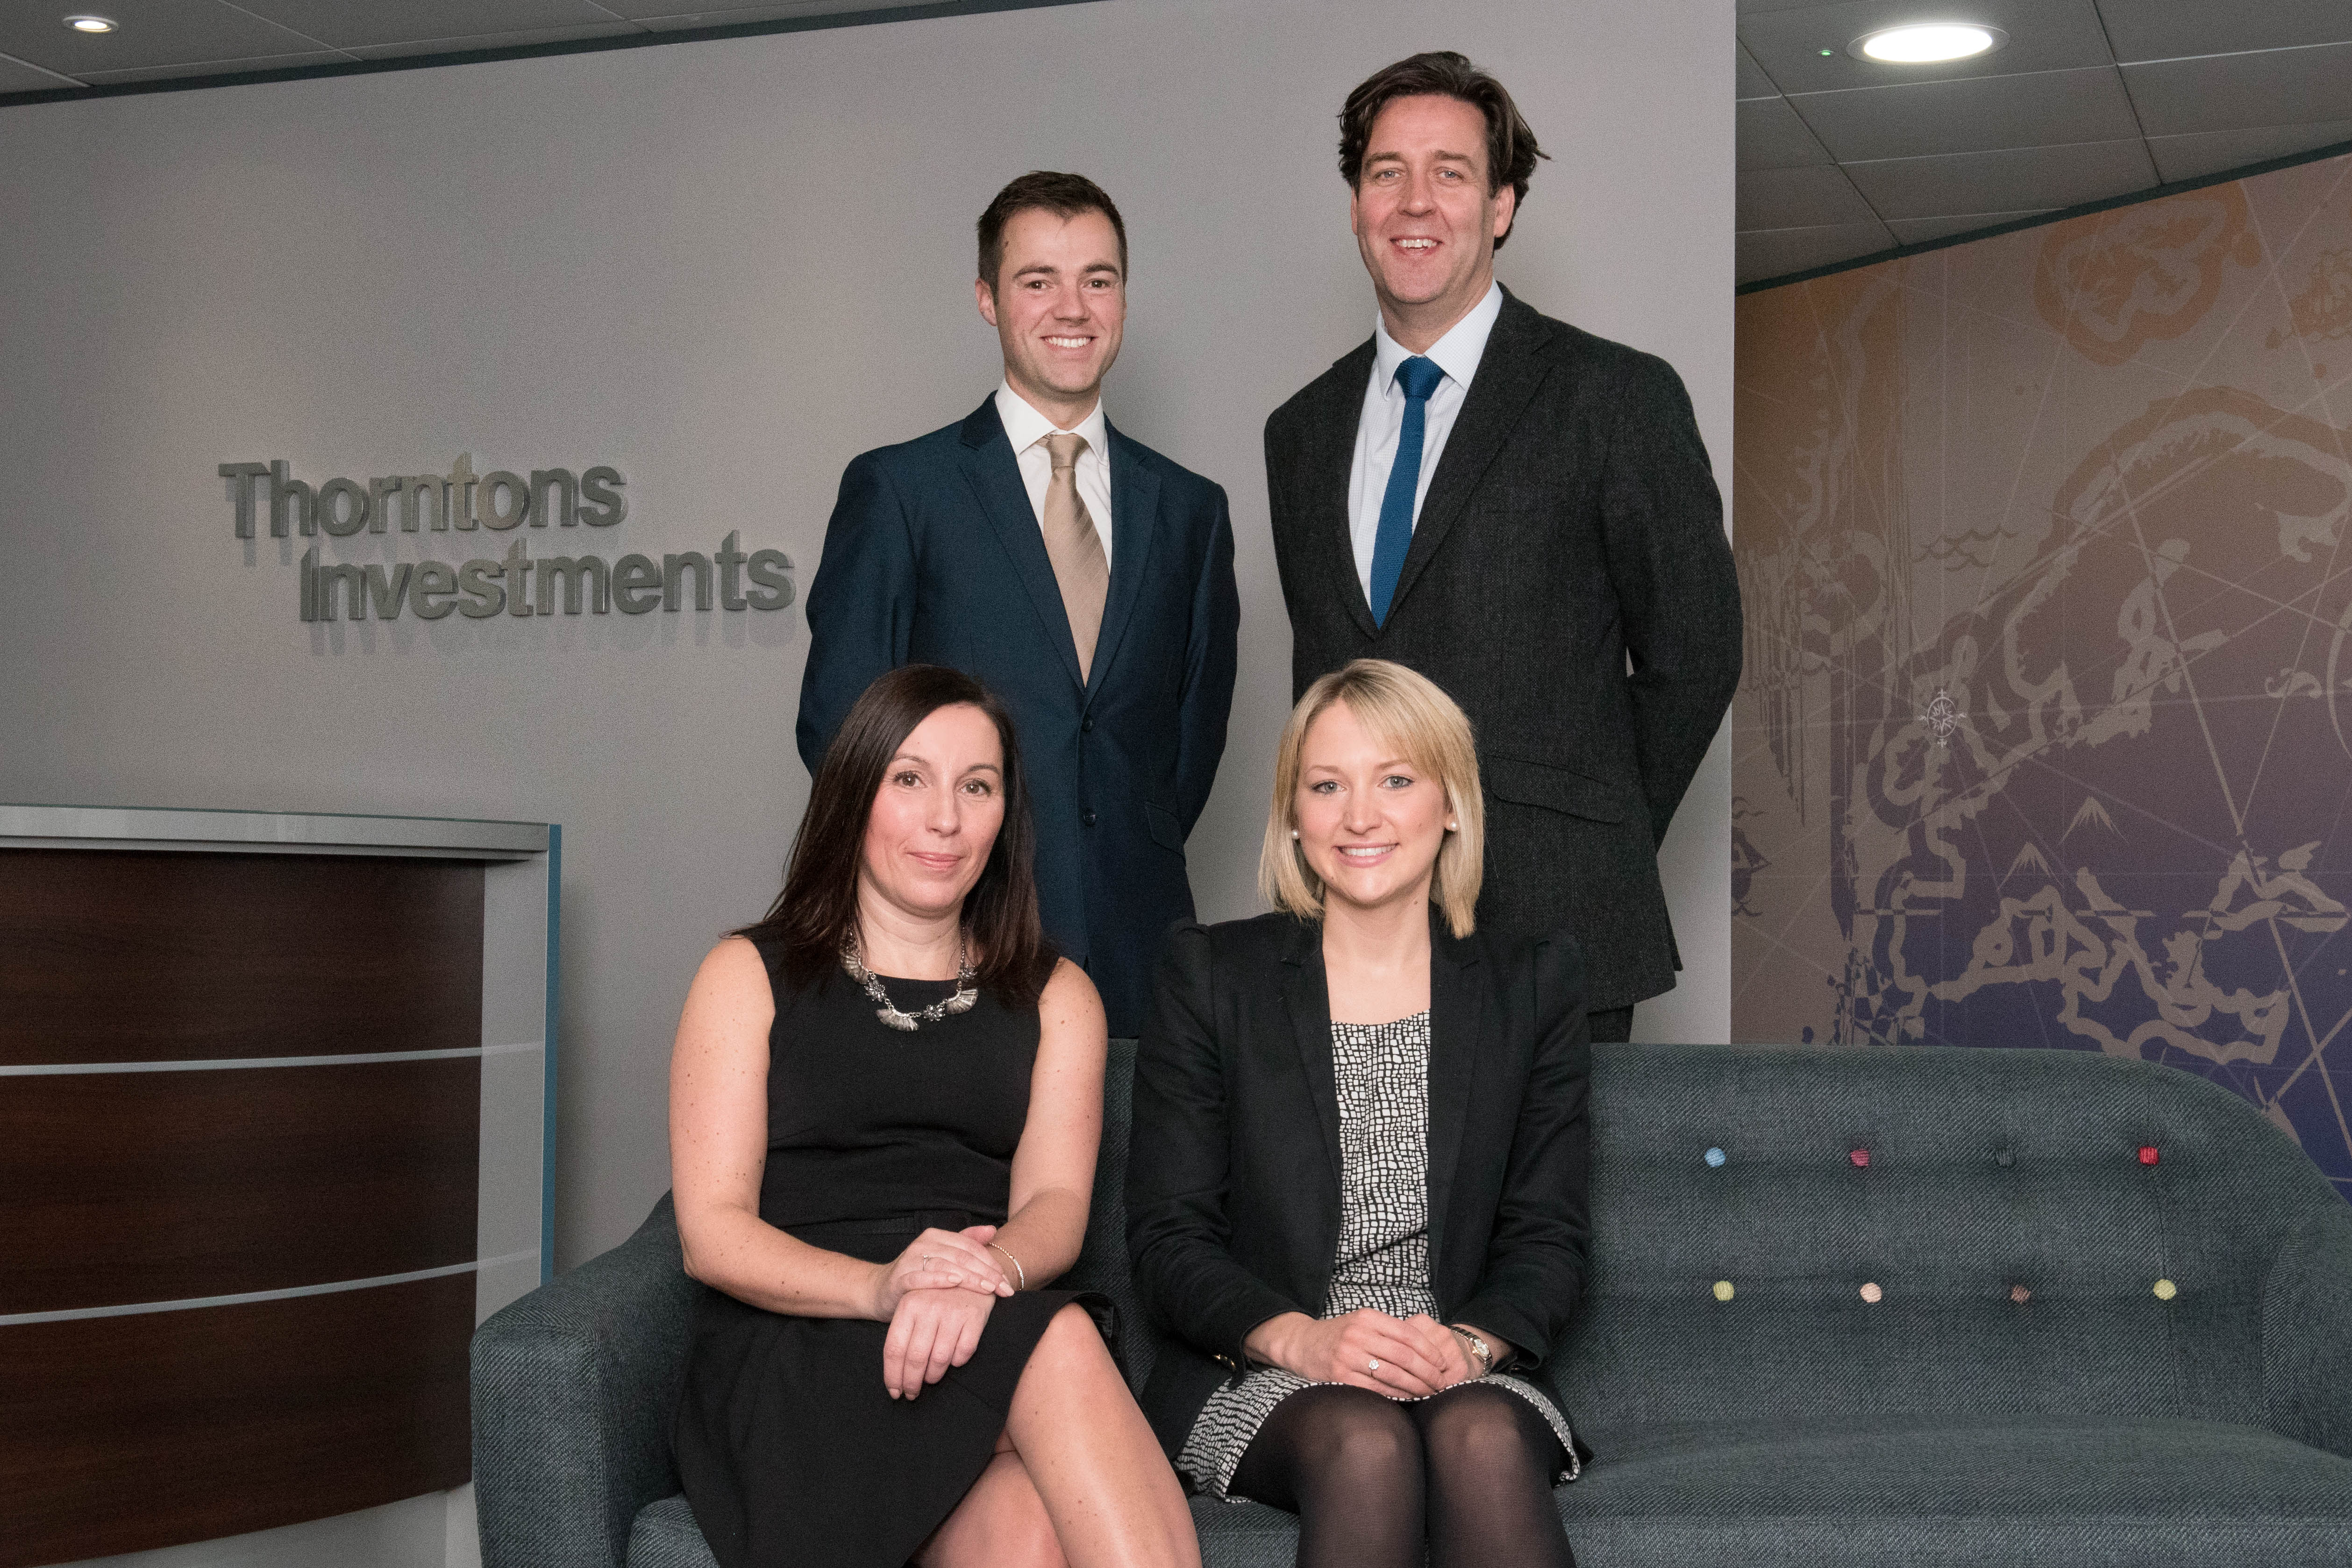 thorntons_investments_triple_appointment